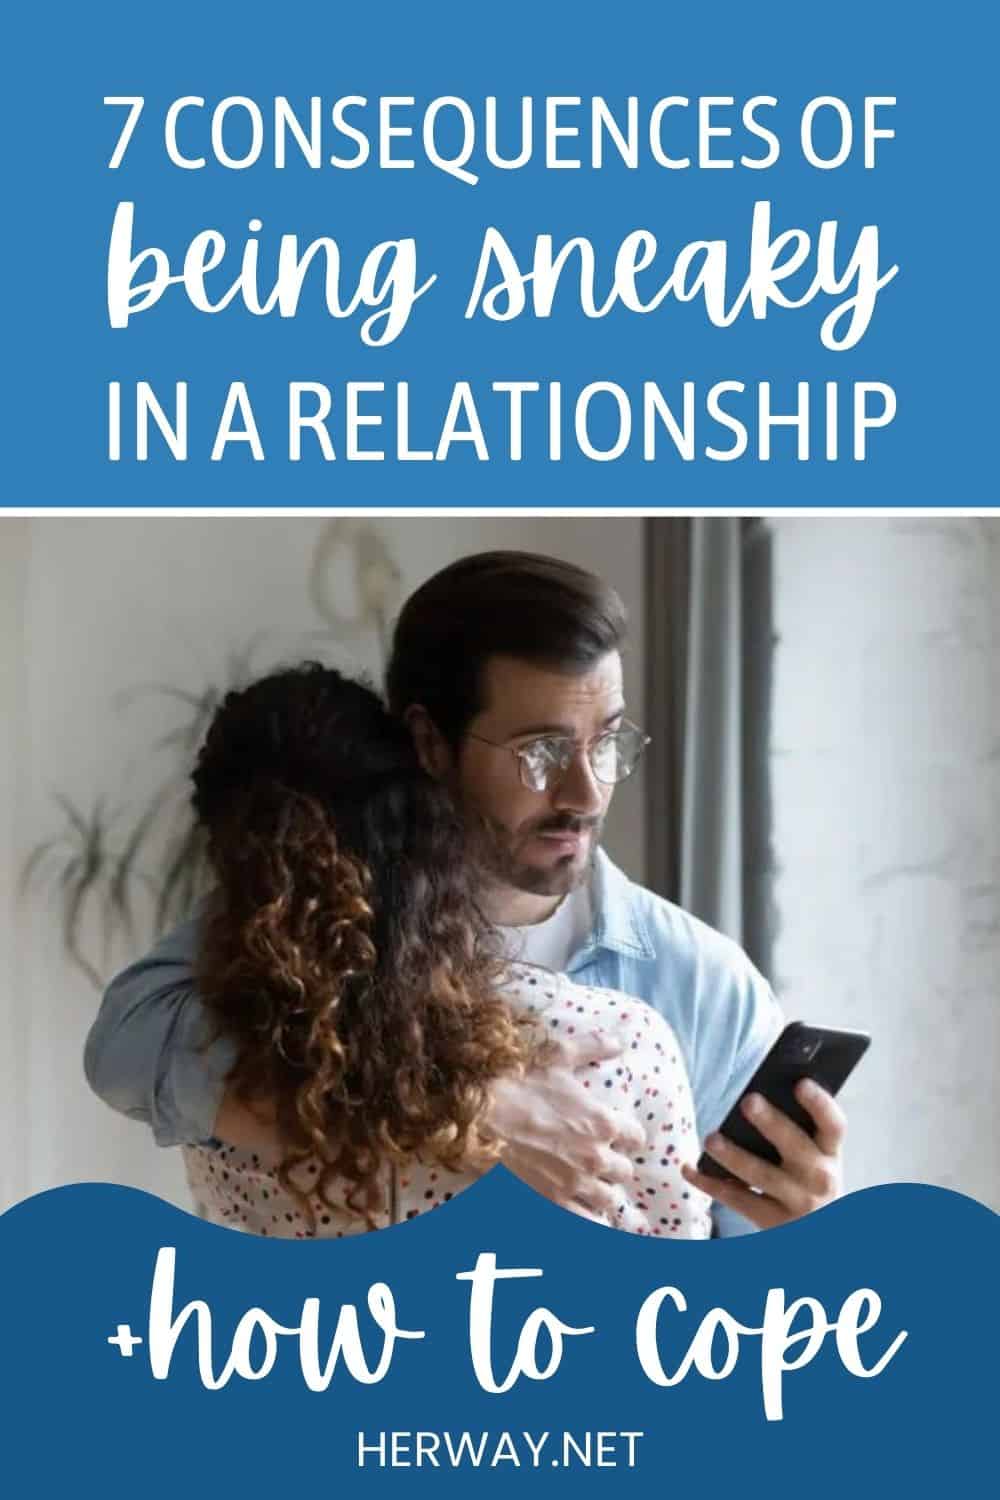 7 Consequences Of Being Sneaky In A Relationship (+ How To Cope) Pinterest